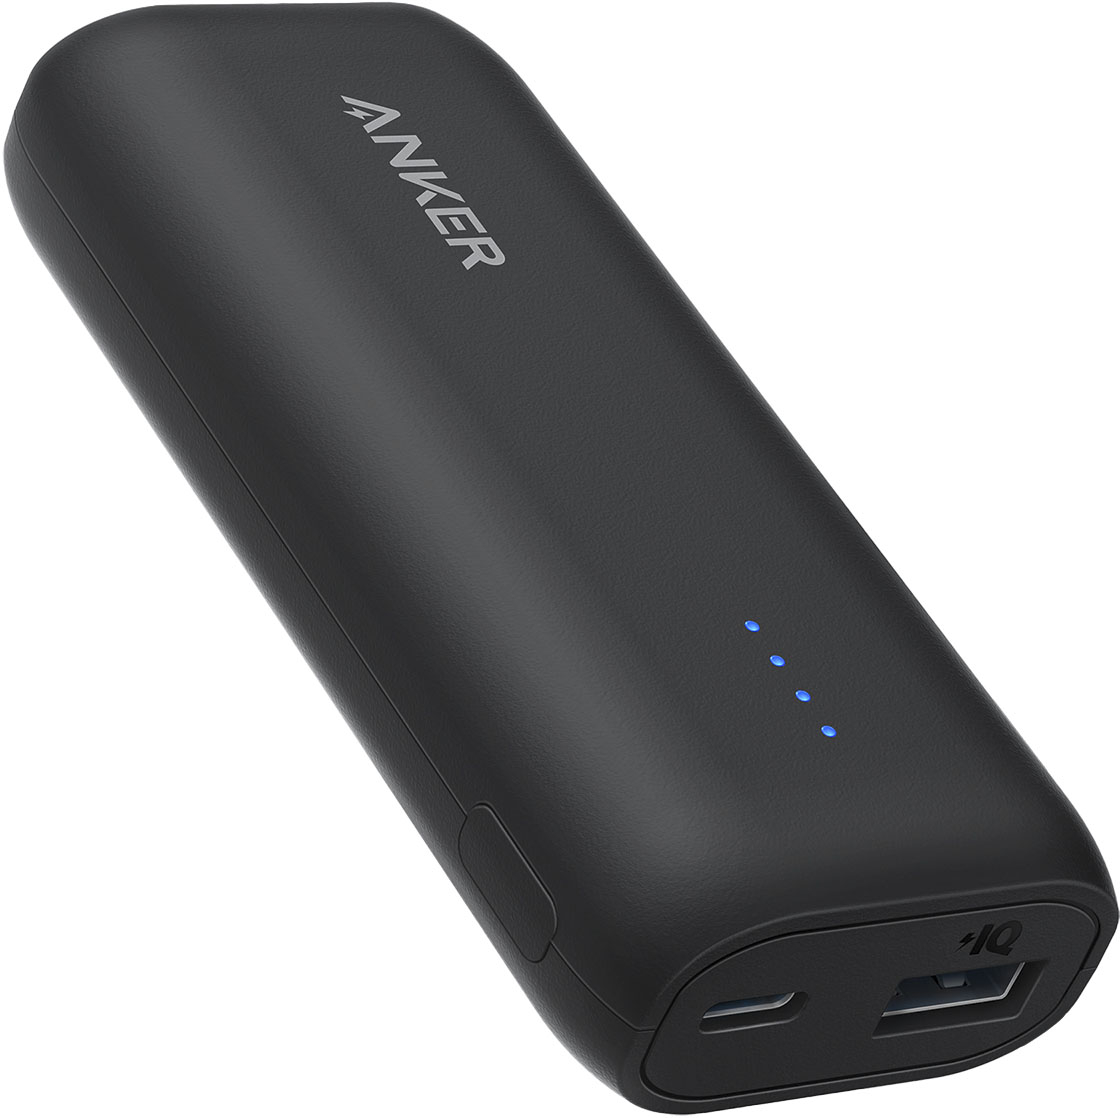 Anker 321 Power Bank 5200 mAh — Custom ANKER Power Banks and Chargers